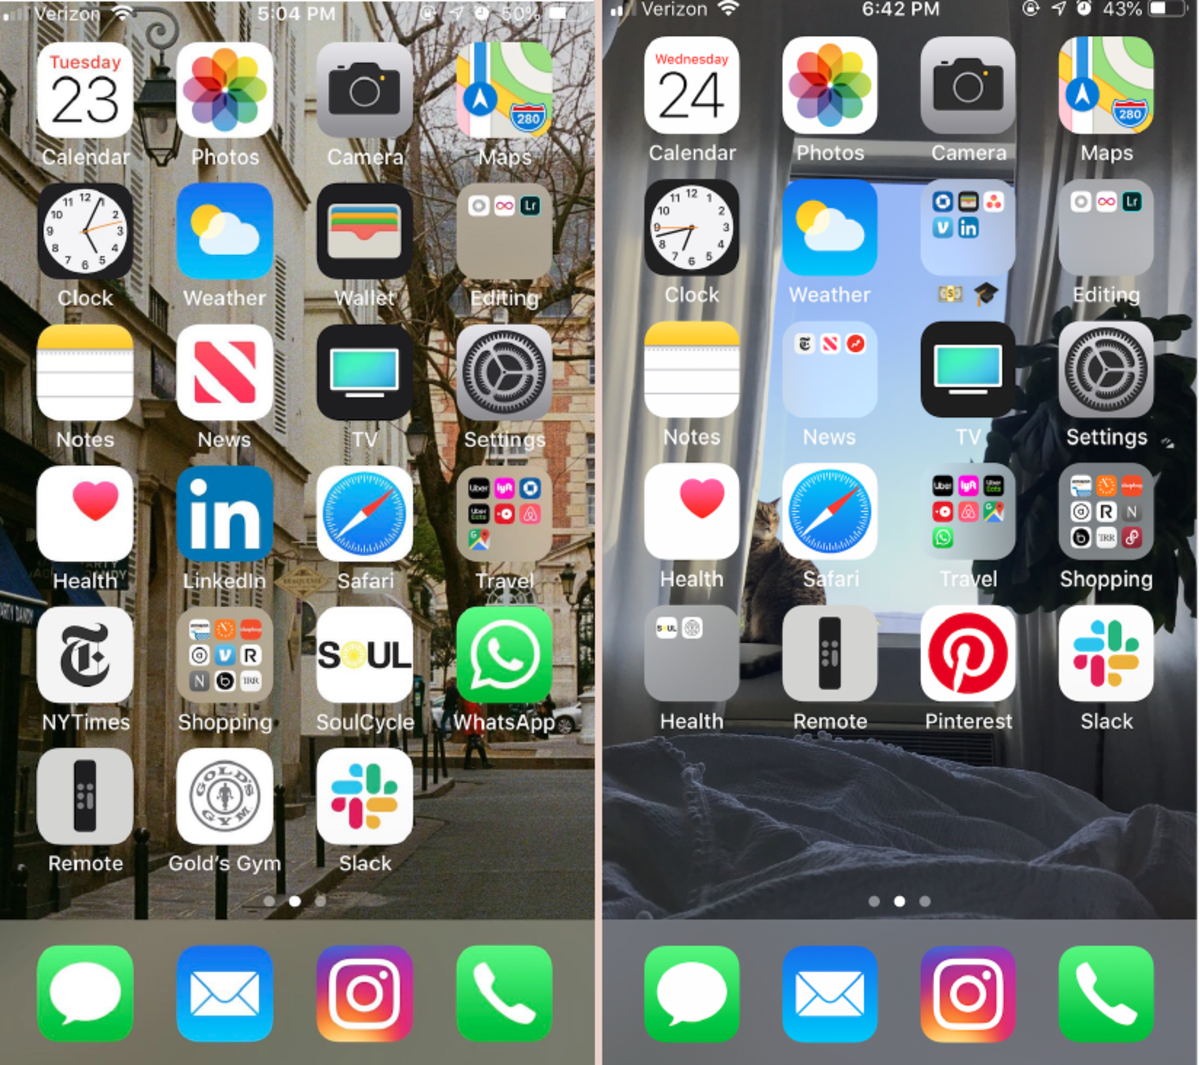 Katie's home screen (left: before, right: after)